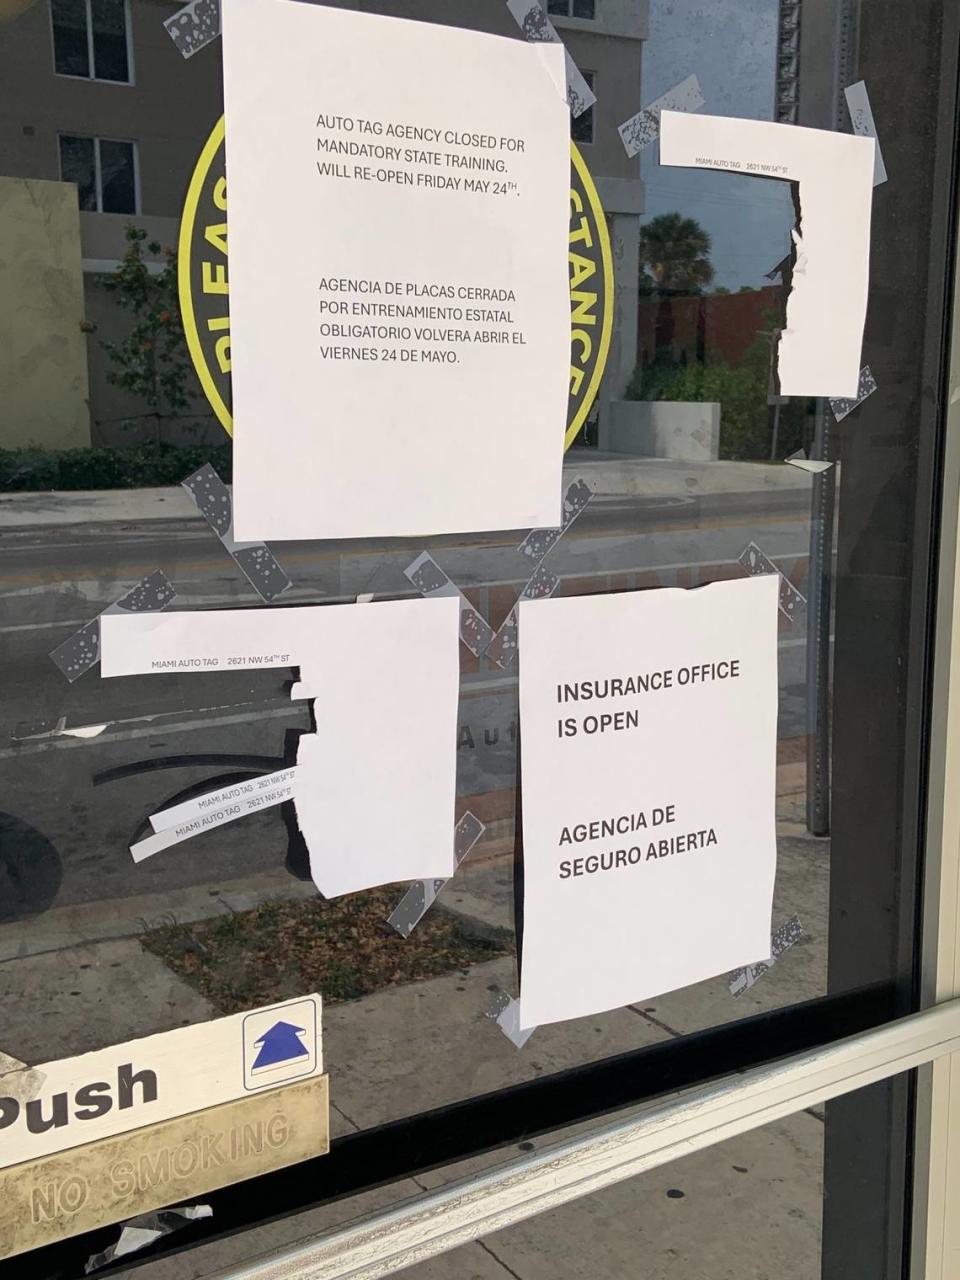 “Auto tag agency closed for mandatory state training. Will re-open Friday, May 24” was Friday’s new sign. The previous sign said the auto tag agency would reopen Monday.